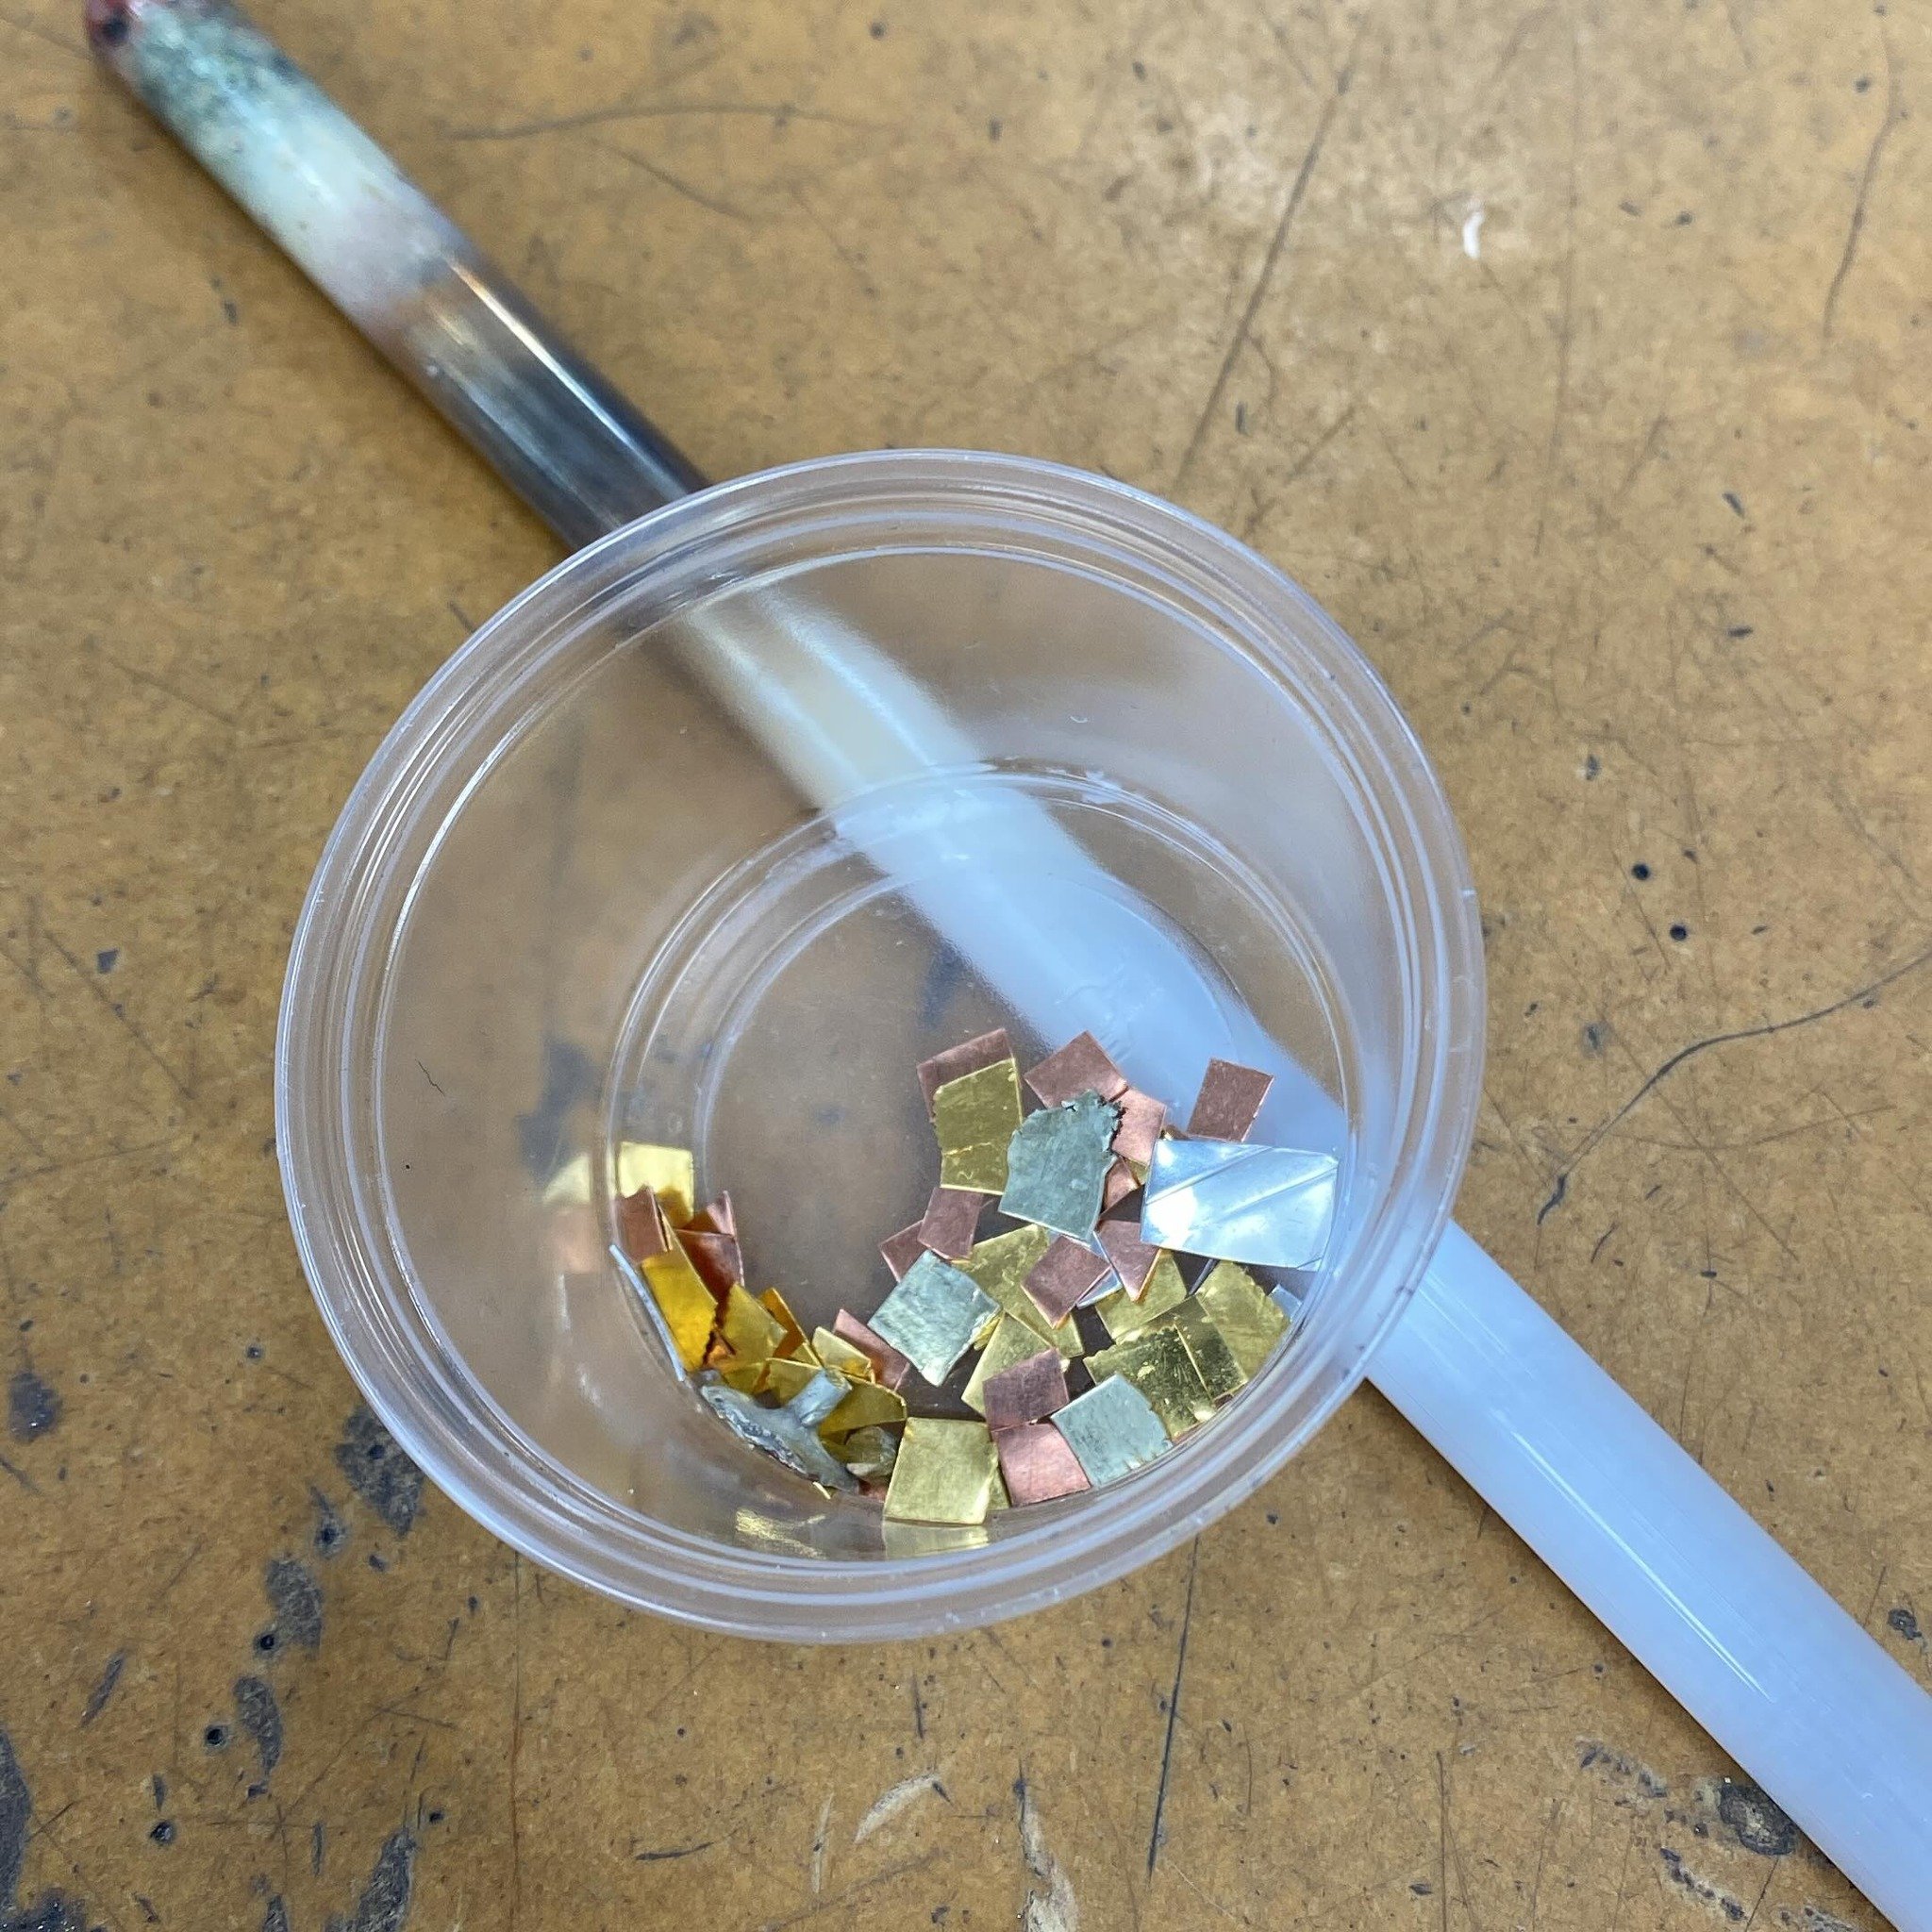 Waiting to do some casting in gold&hellip;.. see the result later!!
#onmybench #handmadeintoronto #finejewellery #customjewellery